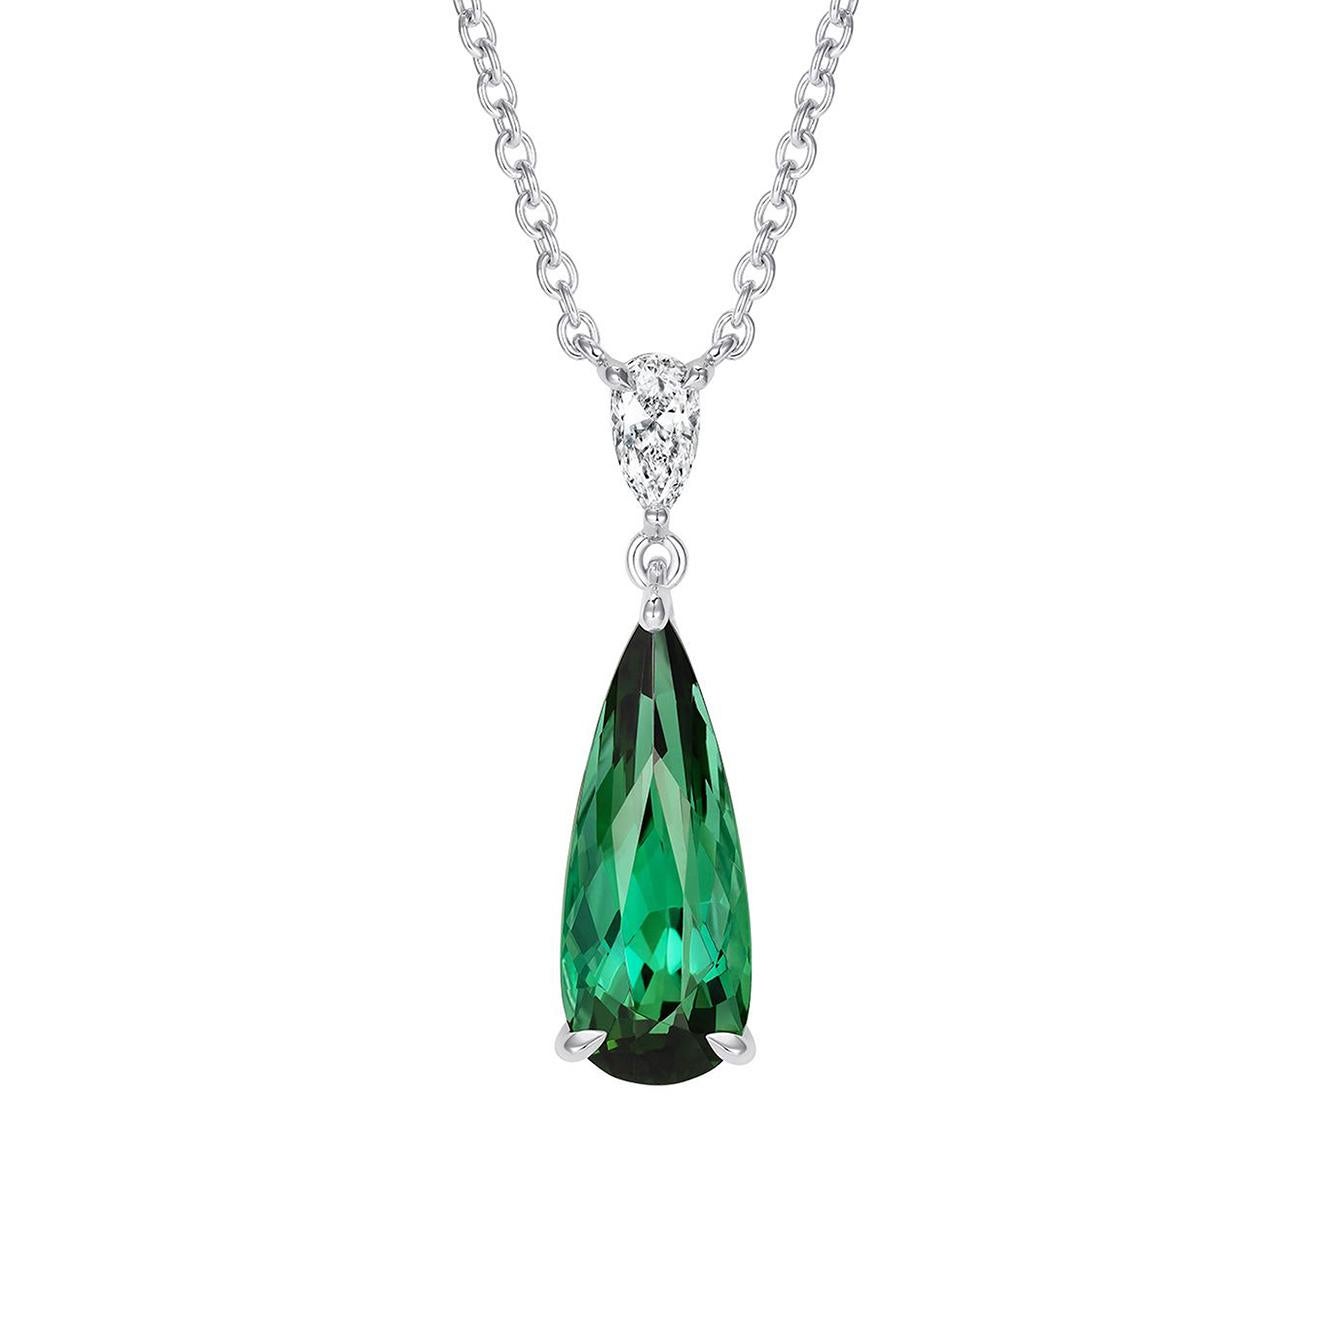 A beautiful pear shape green tourmaline set below a pear shape diamond in the unique Hirsh Wallace setting.

- 2.60 carat pear shape green tourmaline
- 0.16 carat pear shape diamond
- Created in platinum, handmade in London

Formed deep within the